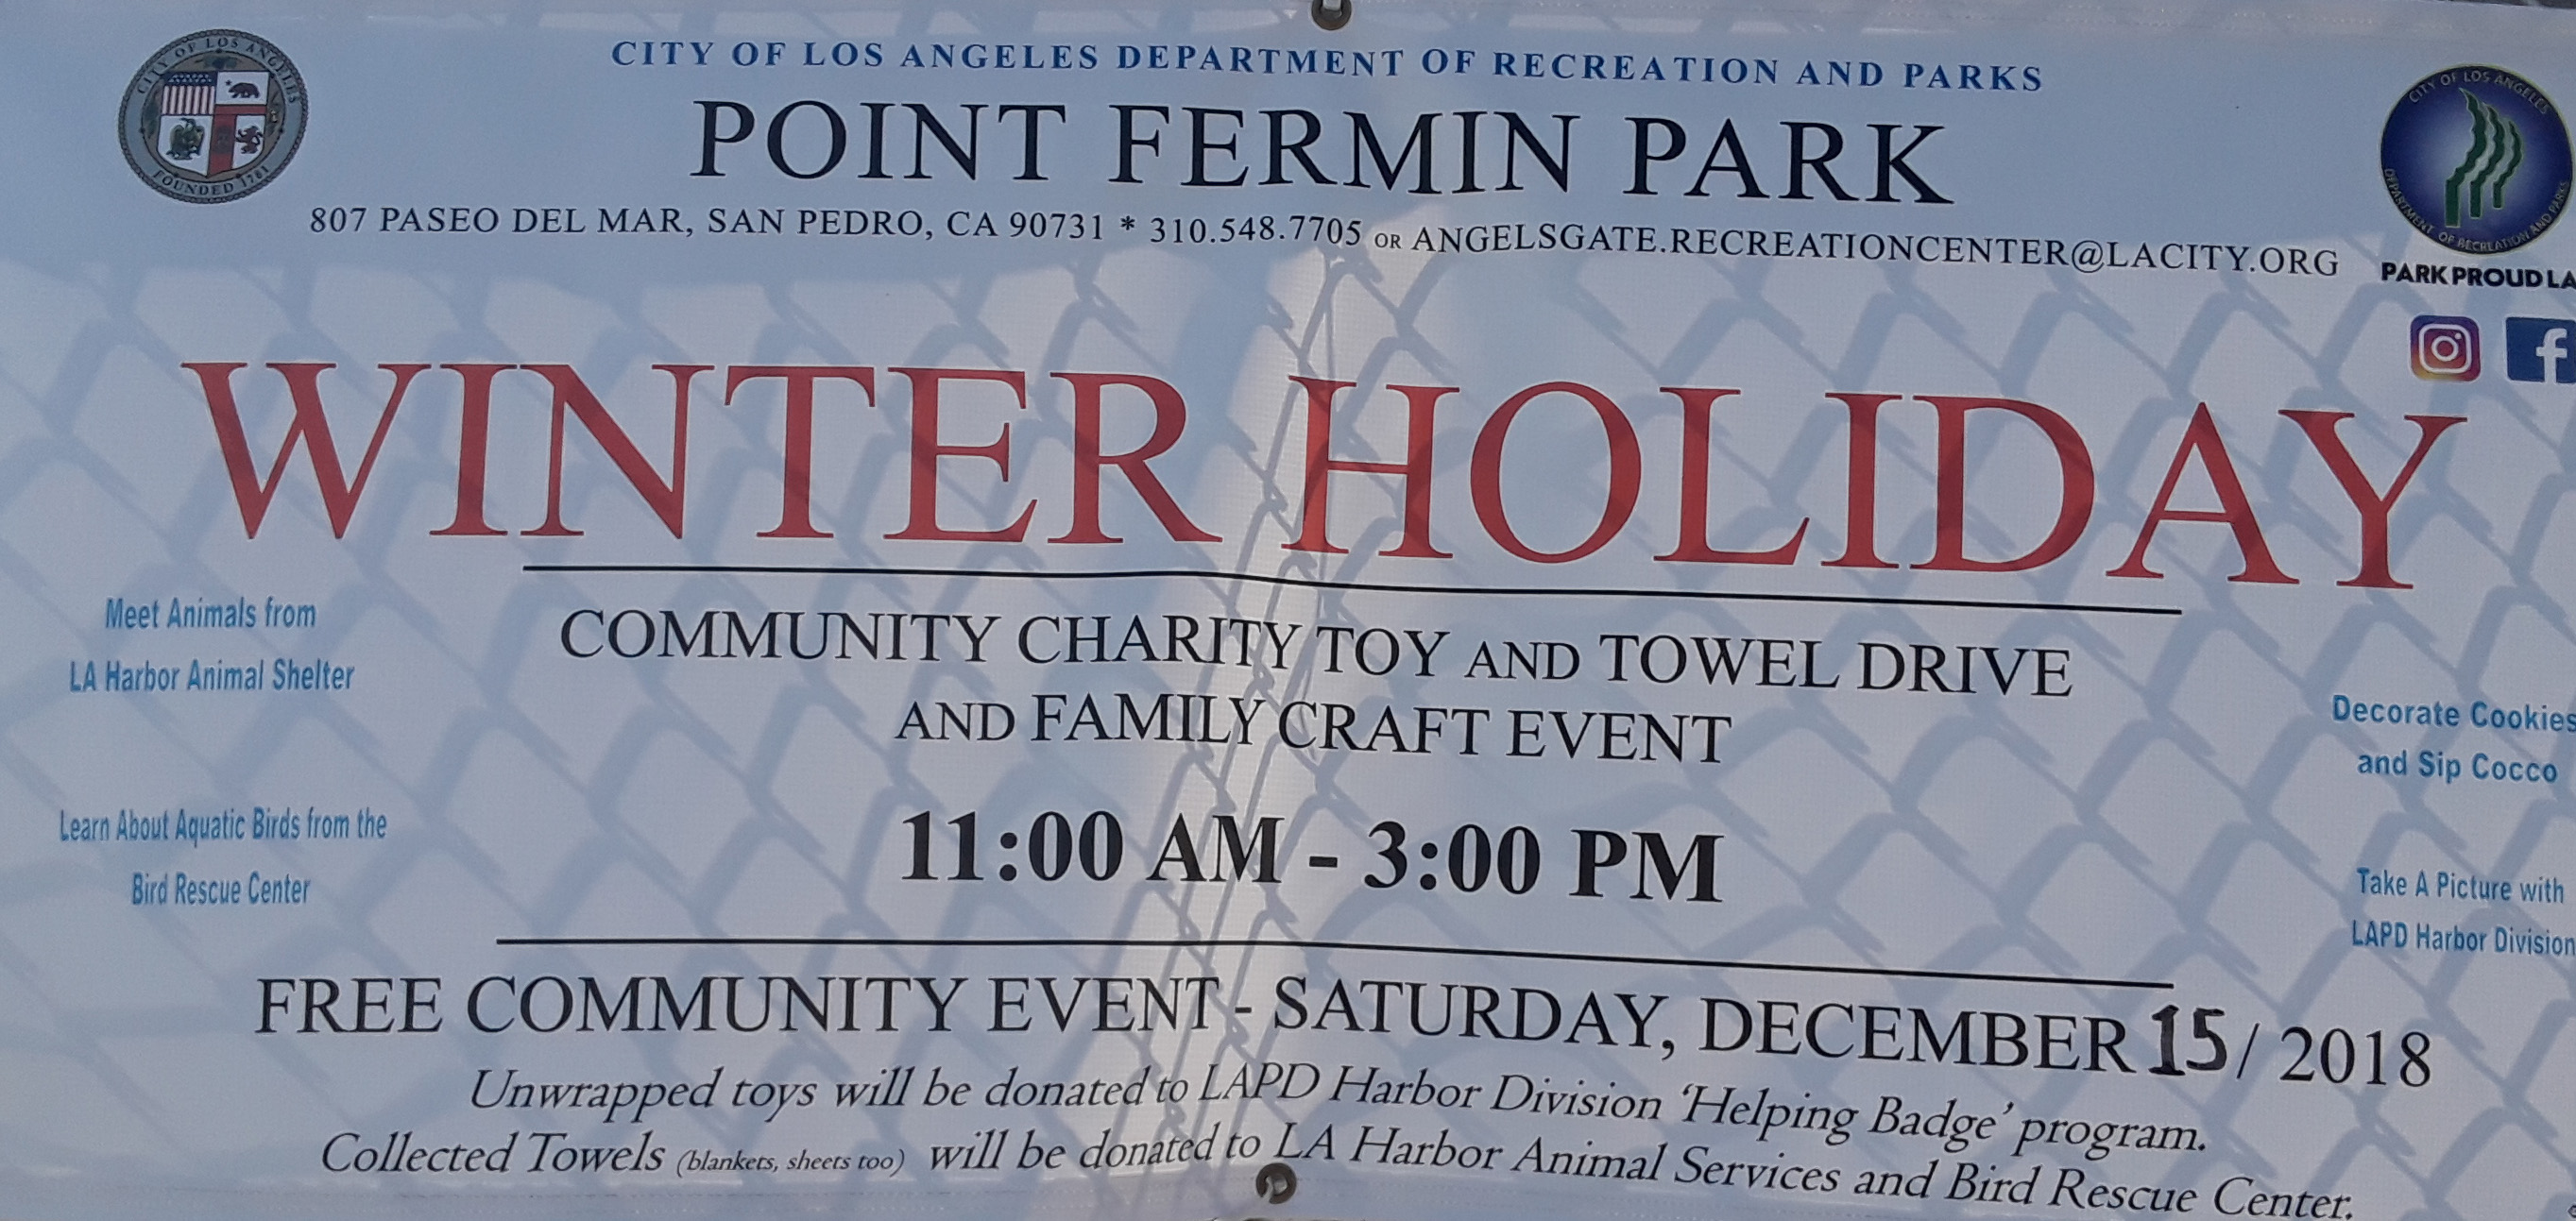 Point Fermin Holiday event